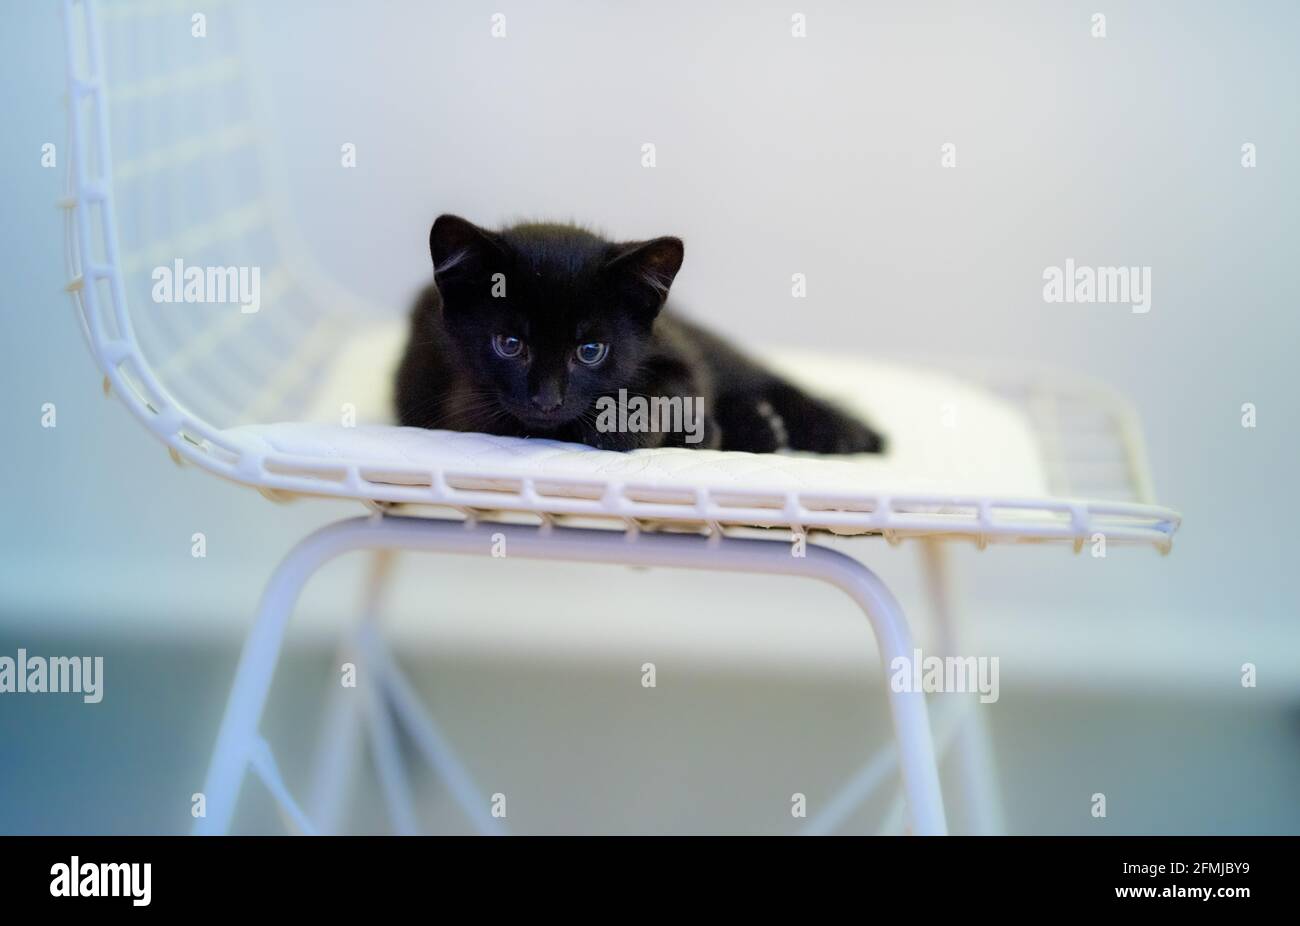 Curious black kitten looking up isolated background Stock Photo